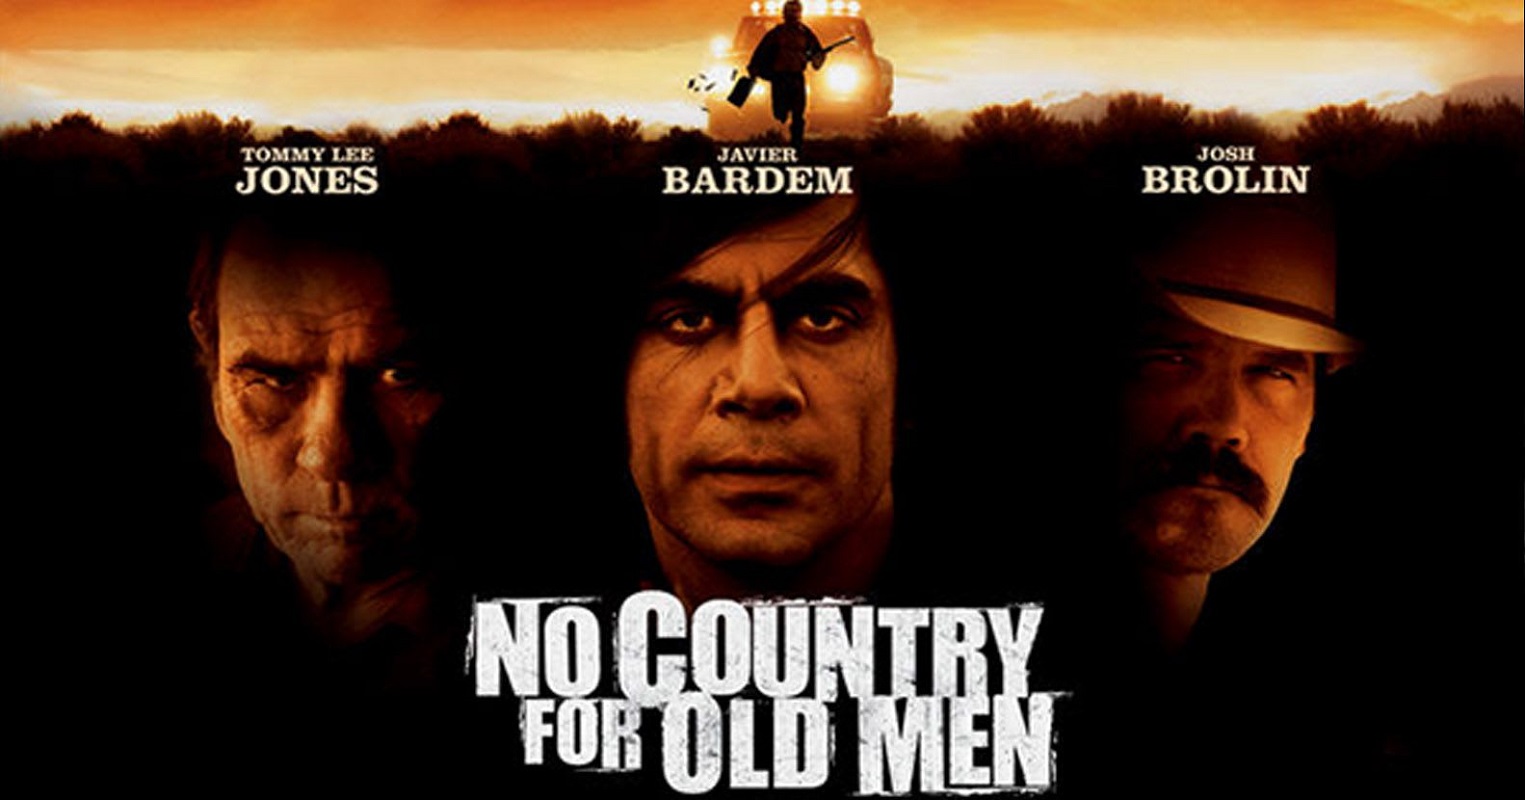 Име:  no country for old men.jpg
Разглеждания: 92
Размер:  169,6 КБ